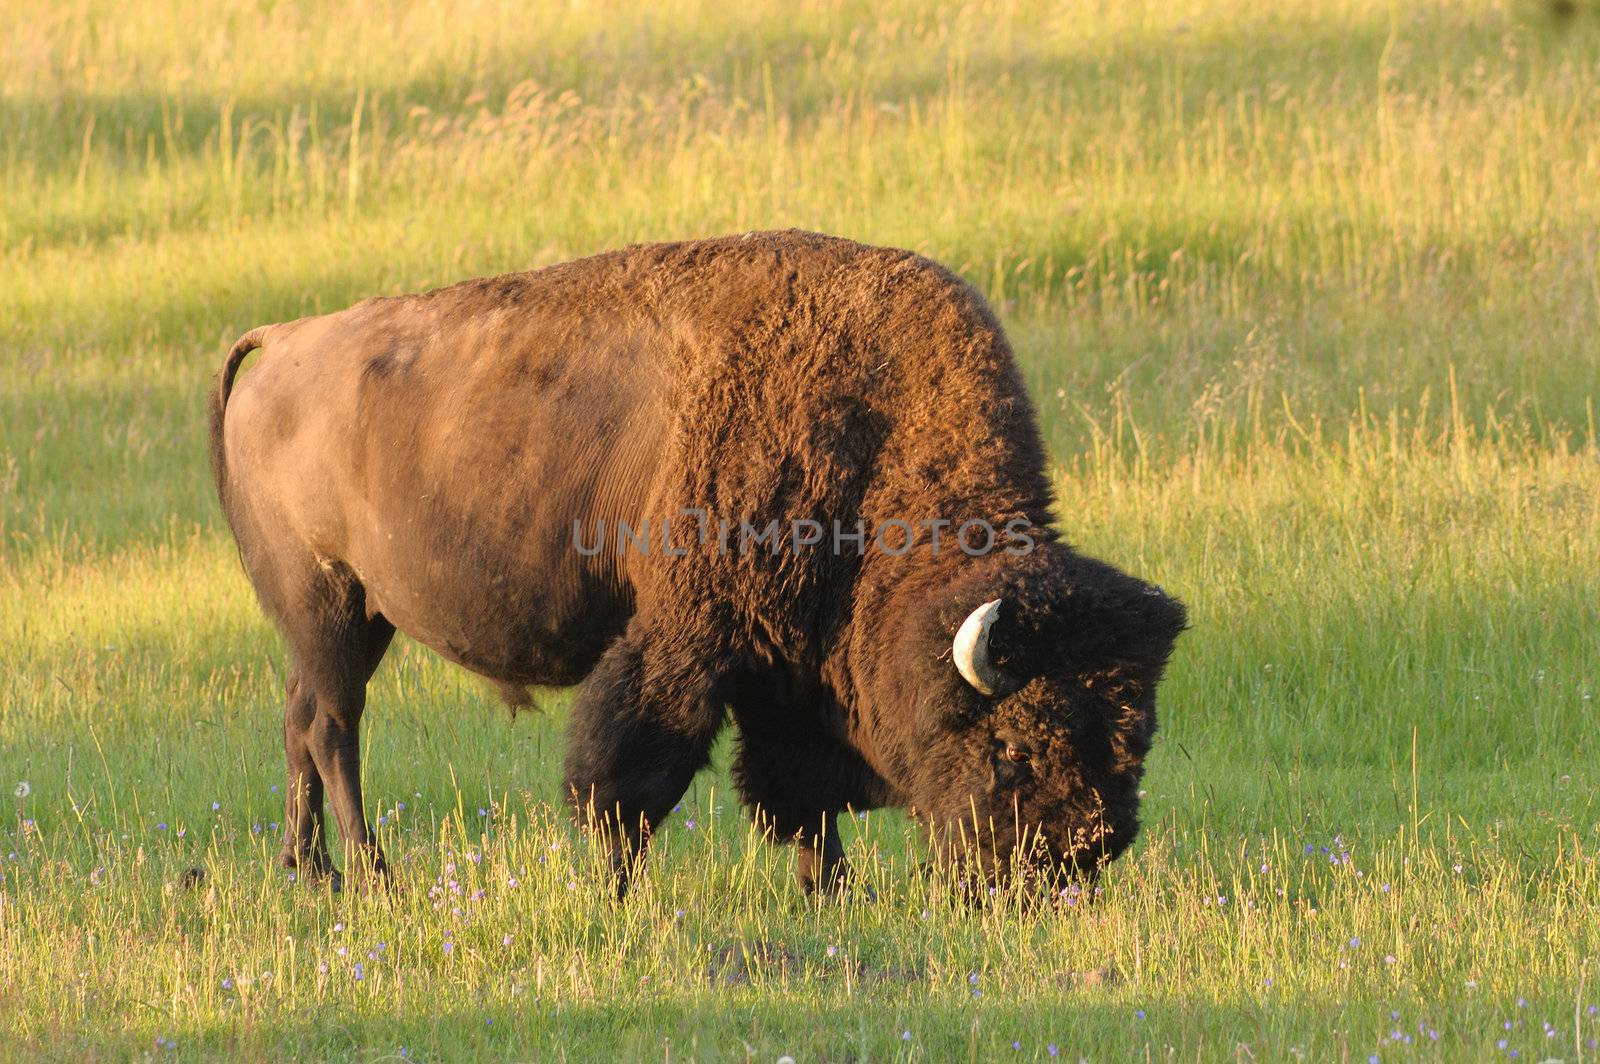 Bison at Dawn by jeffbanke